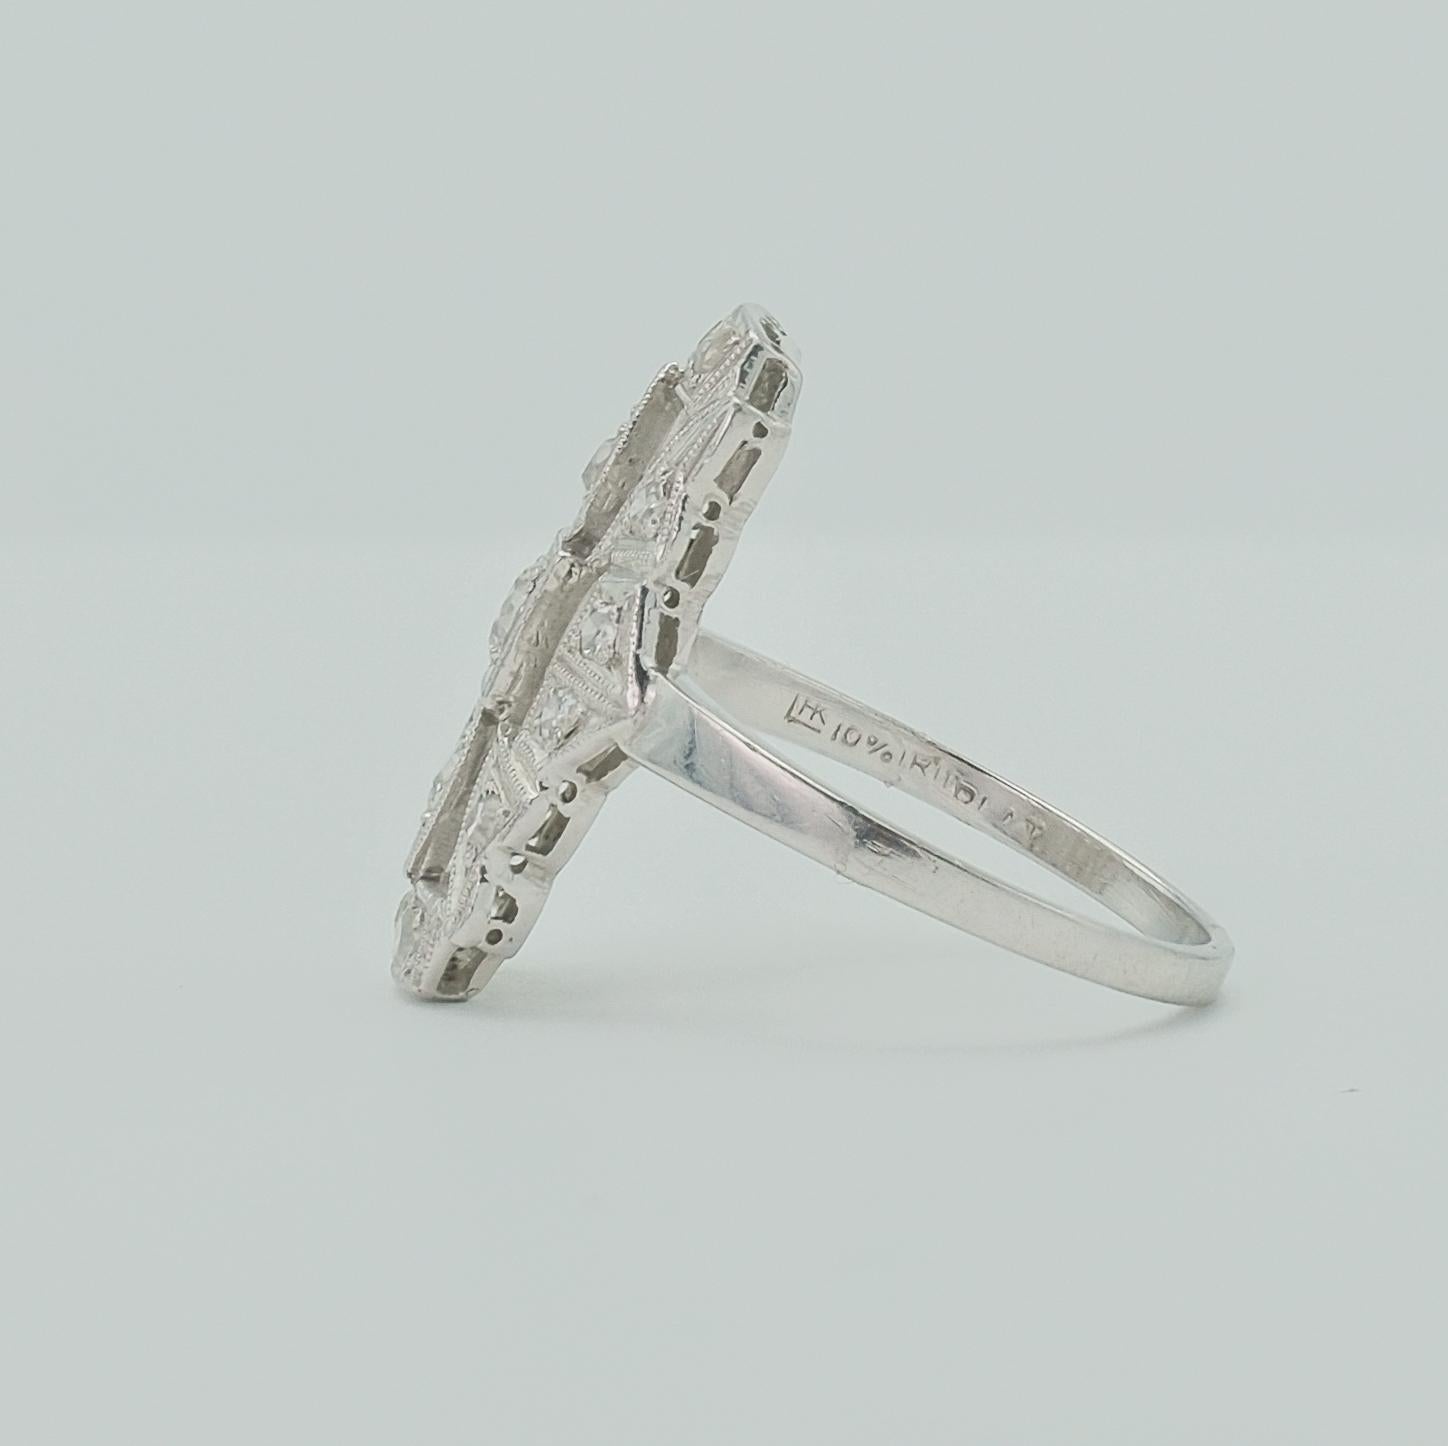 This exceptional Art Deco diamond ring features 15 old European cut VS1-VS2 diamonds with a total weight of 0.35 carats. Uniquely crafted in a rectangular geometric shape and set in platinum, the ring's precise metalwork provides a gentle shimmer